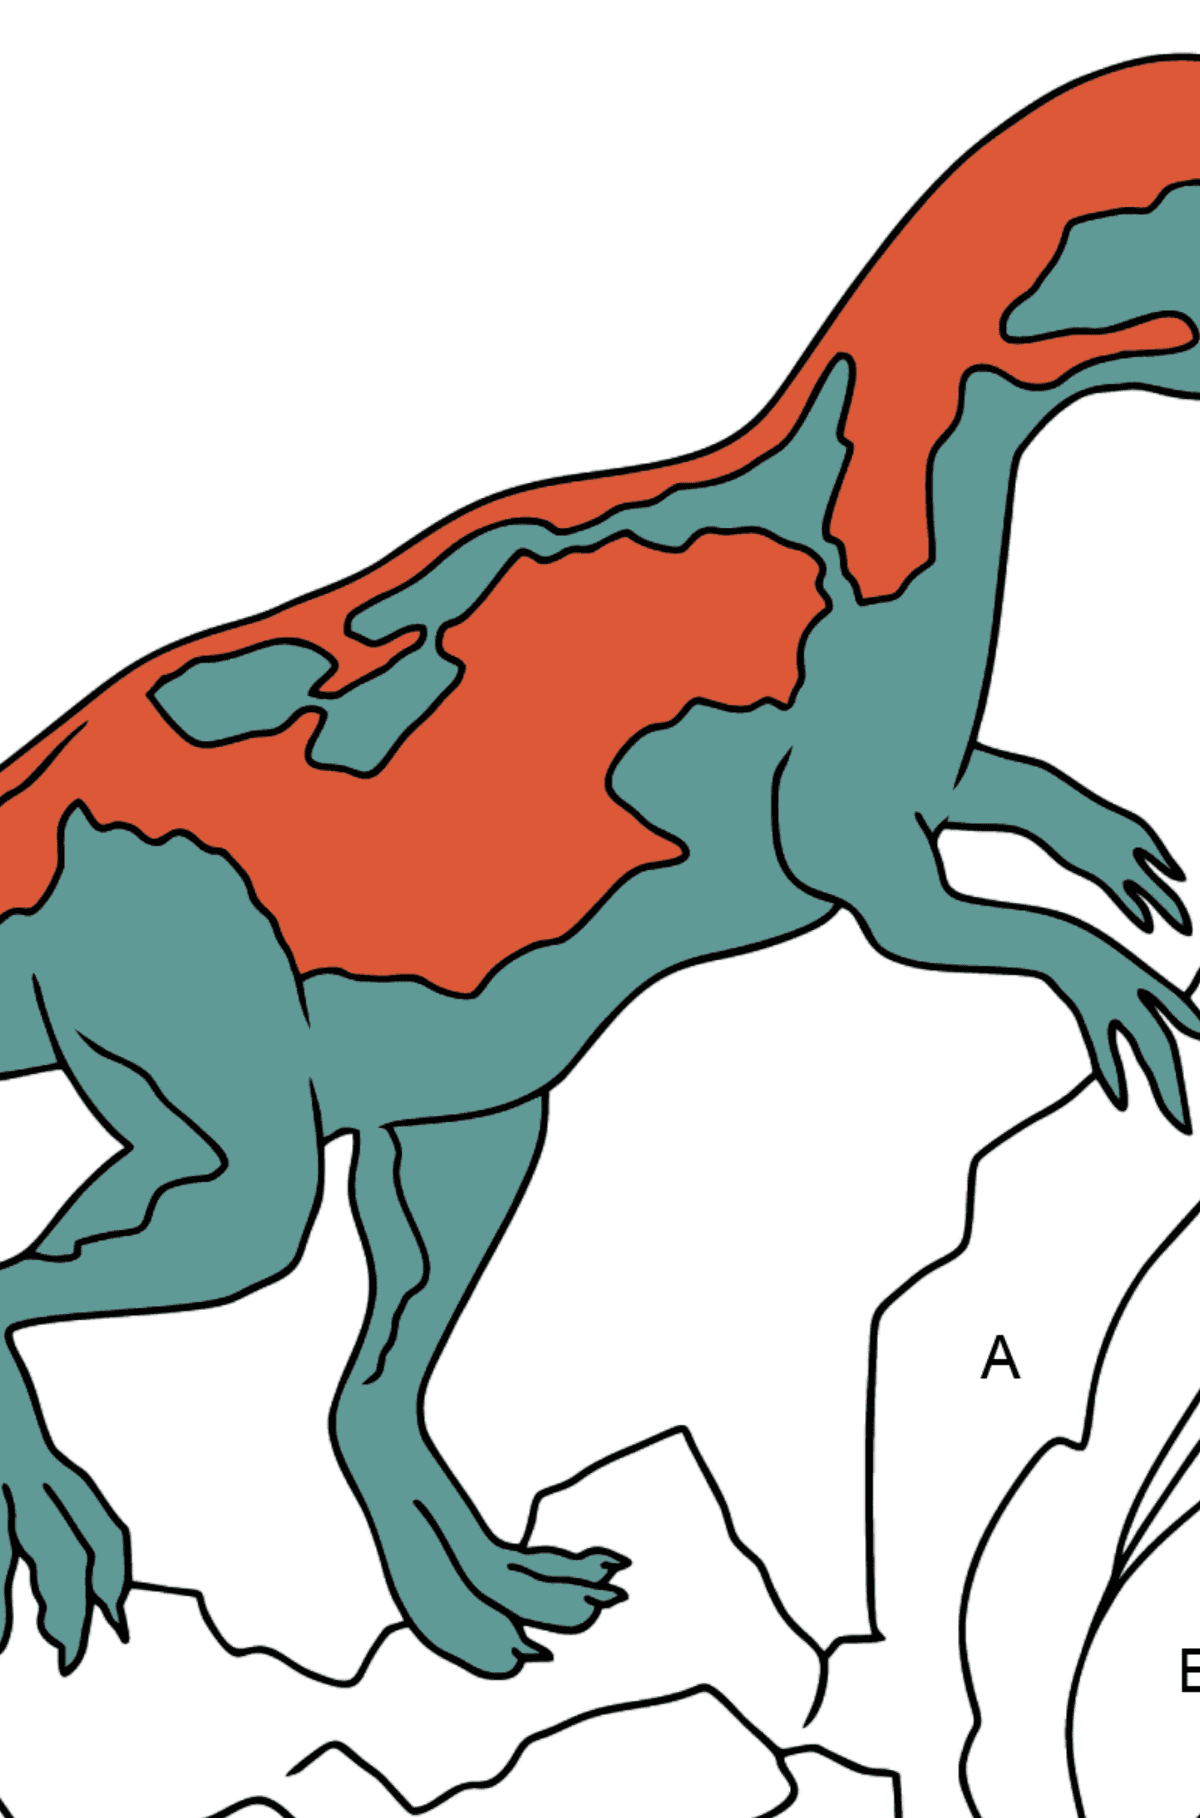 Coloring Page - A Dinosaur is Looking for Food - Coloring by Letters for Kids